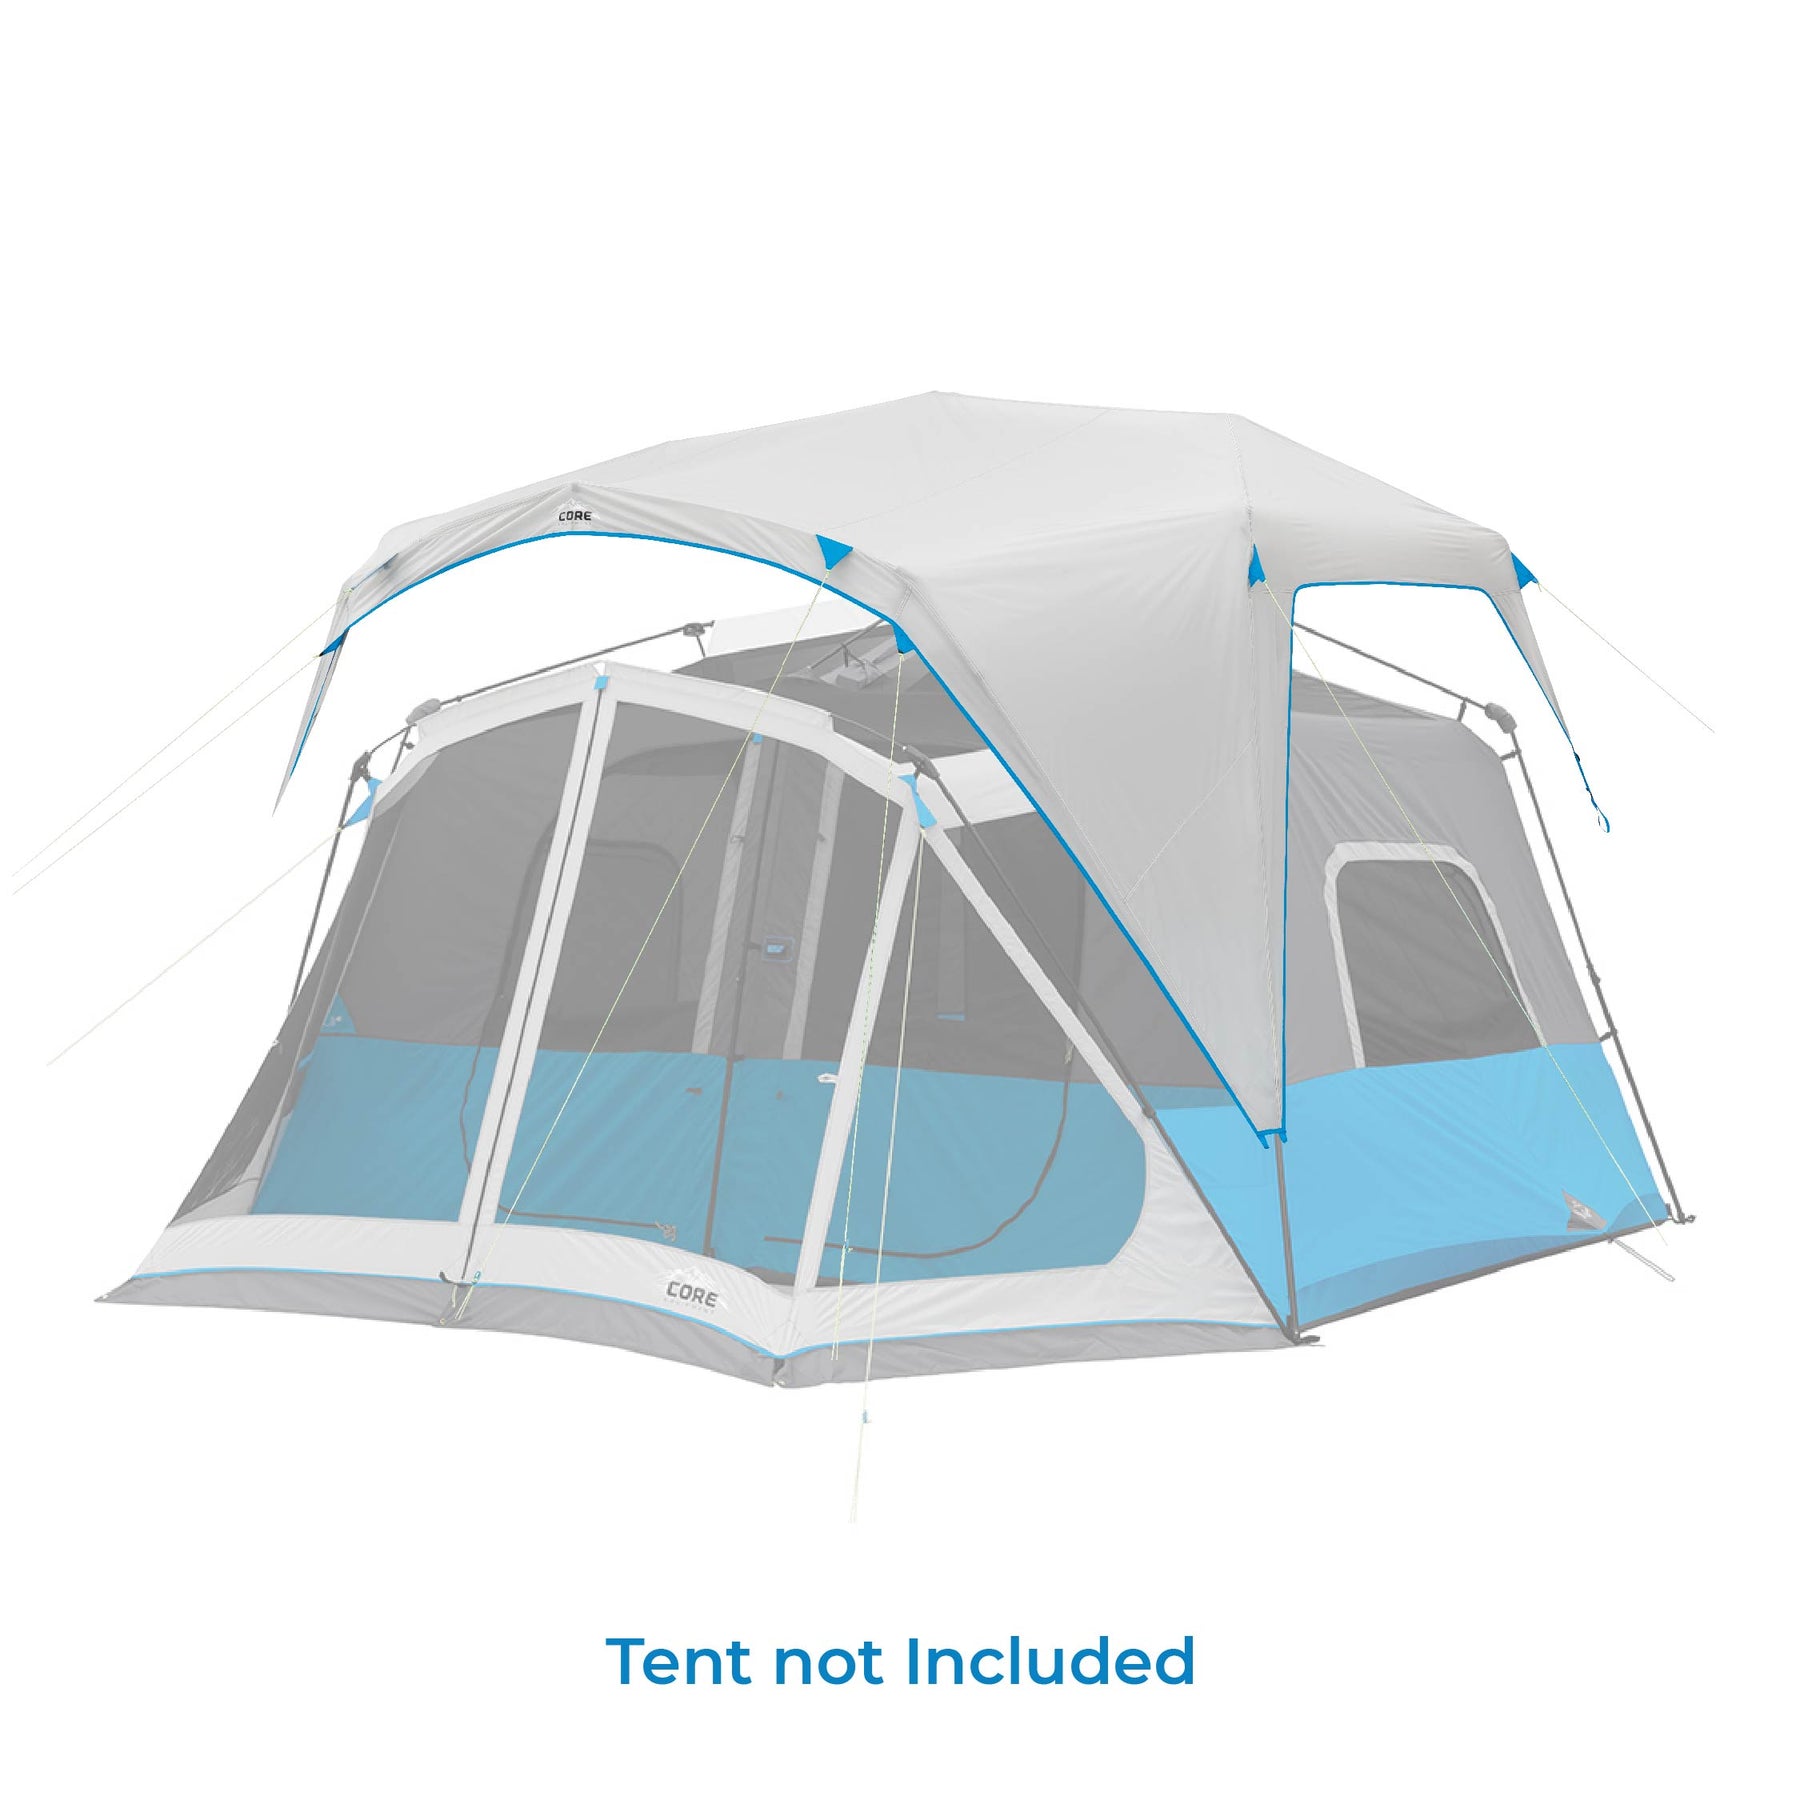 10 Person Instant Cabin Tent with Screen Room Rainfly